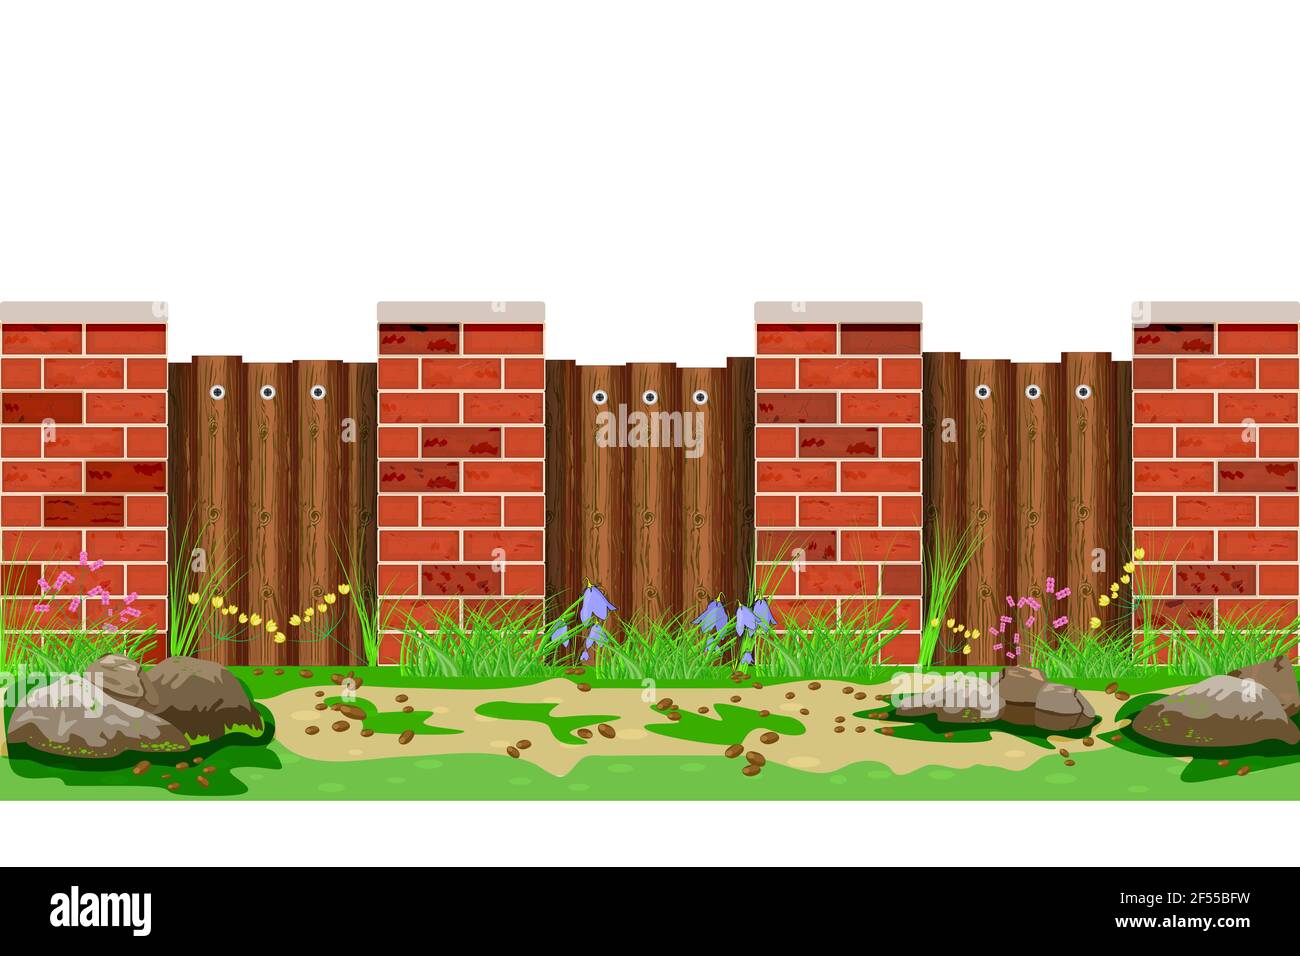 Wooden fence with grass and stones isolated on white background. Farm garden wood barrier with pillars of bricks.Scenery of city park or street wall i Stock Vector